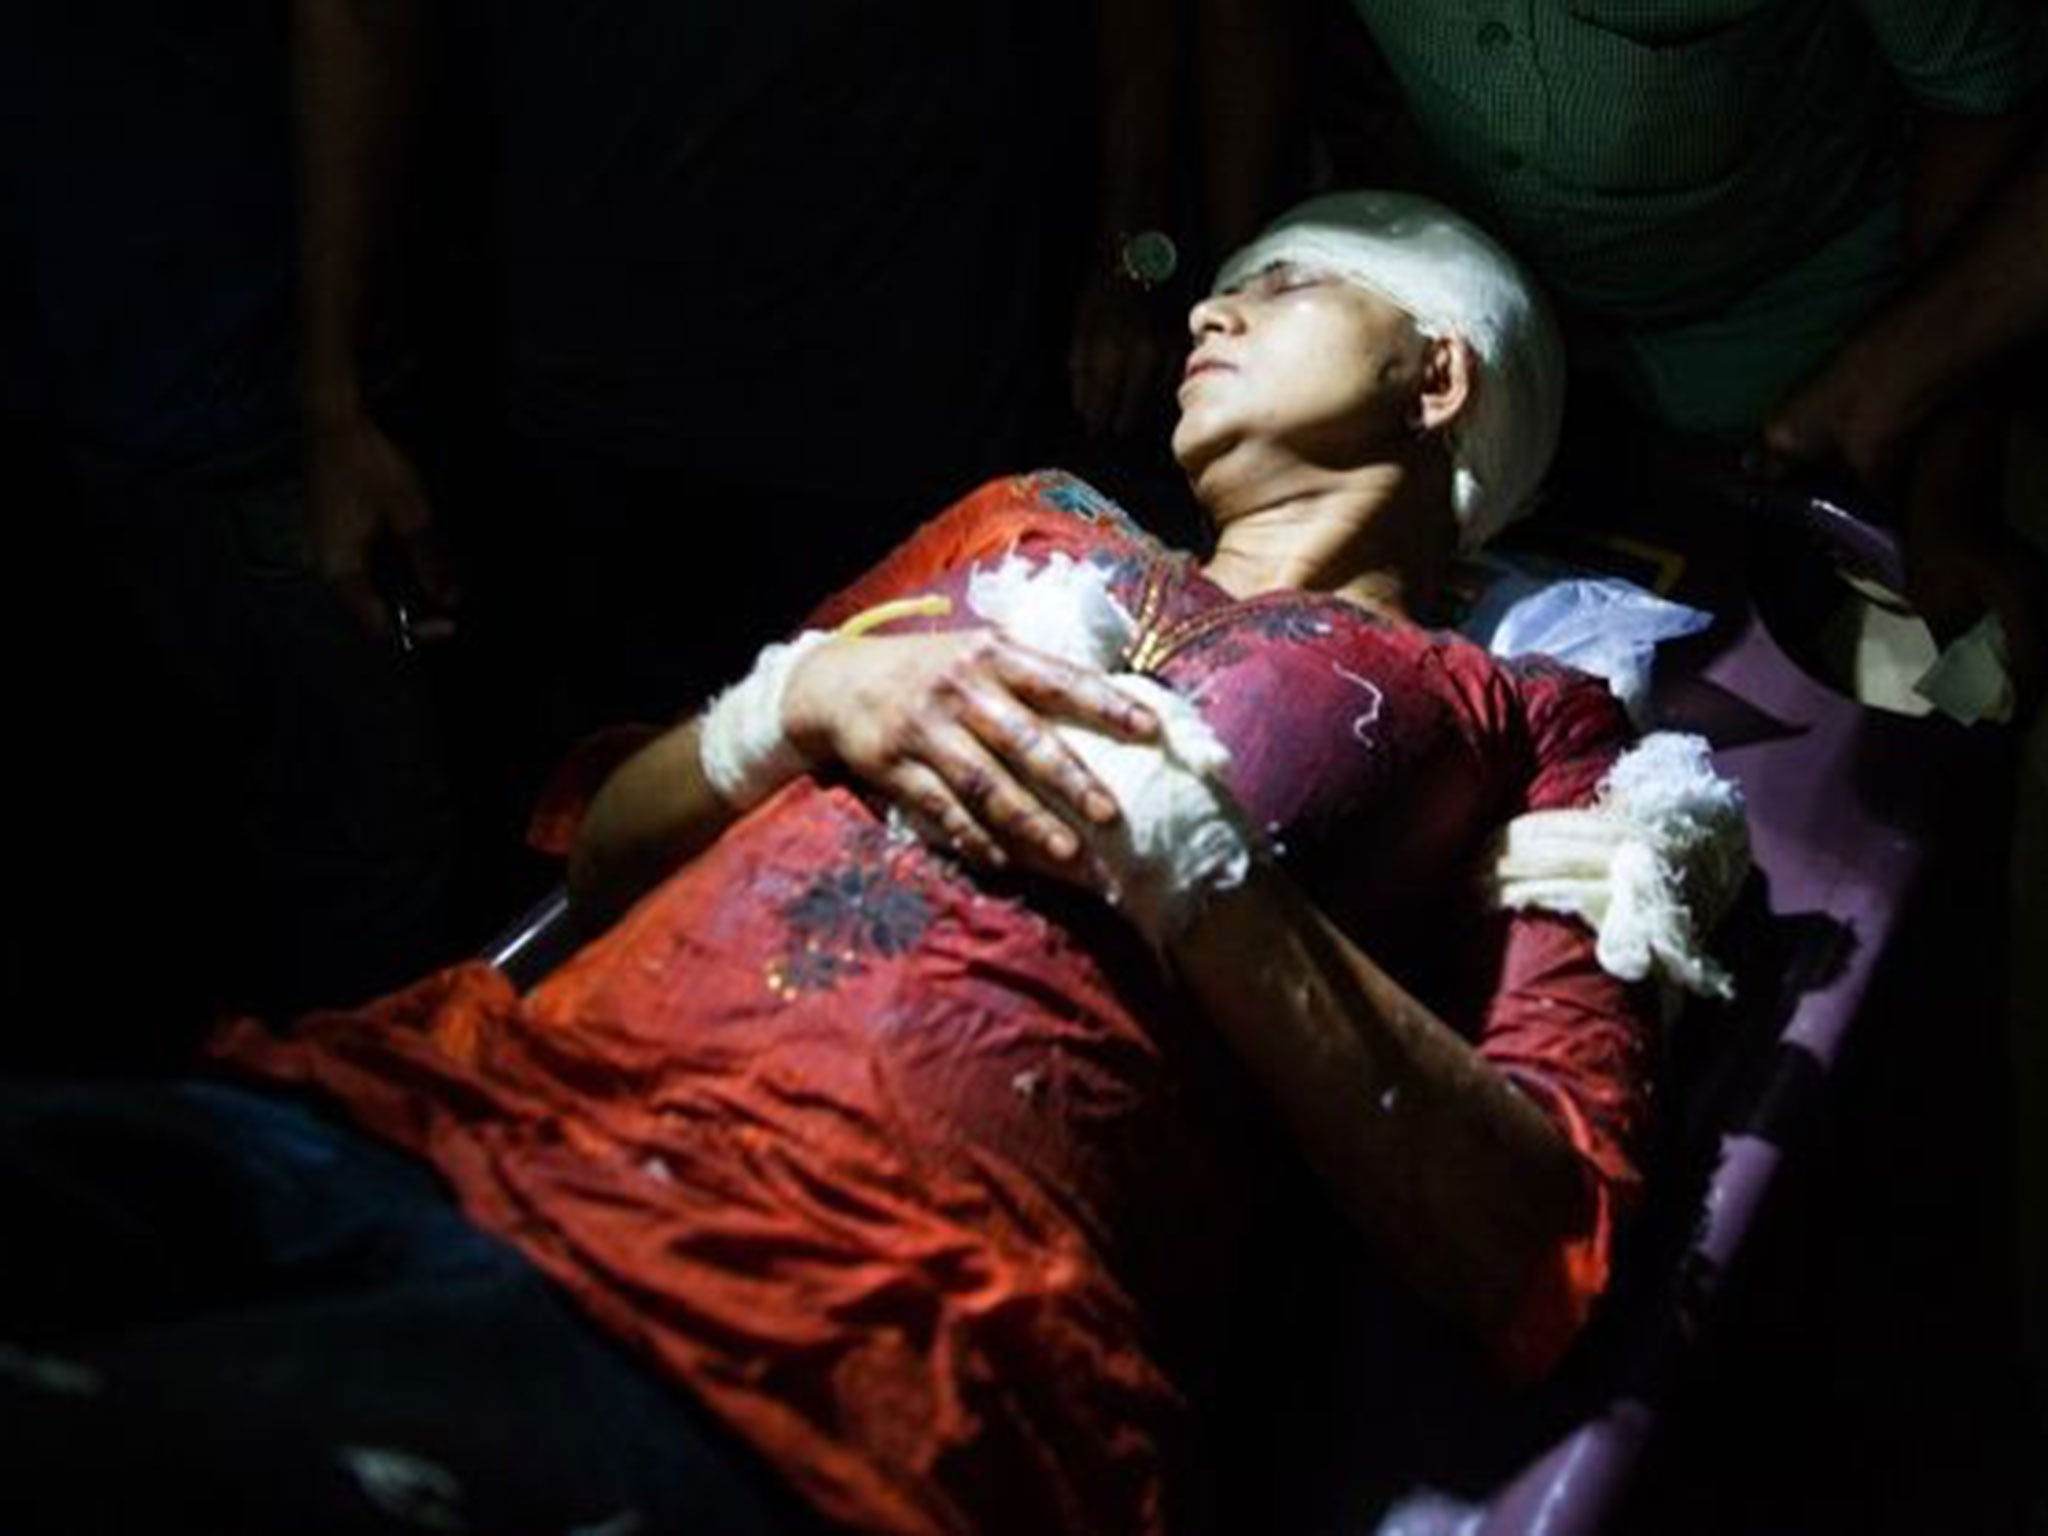 Rafida Bonya Ahmed was seriously injured in the machete attack, but survived (AFP/Getty)